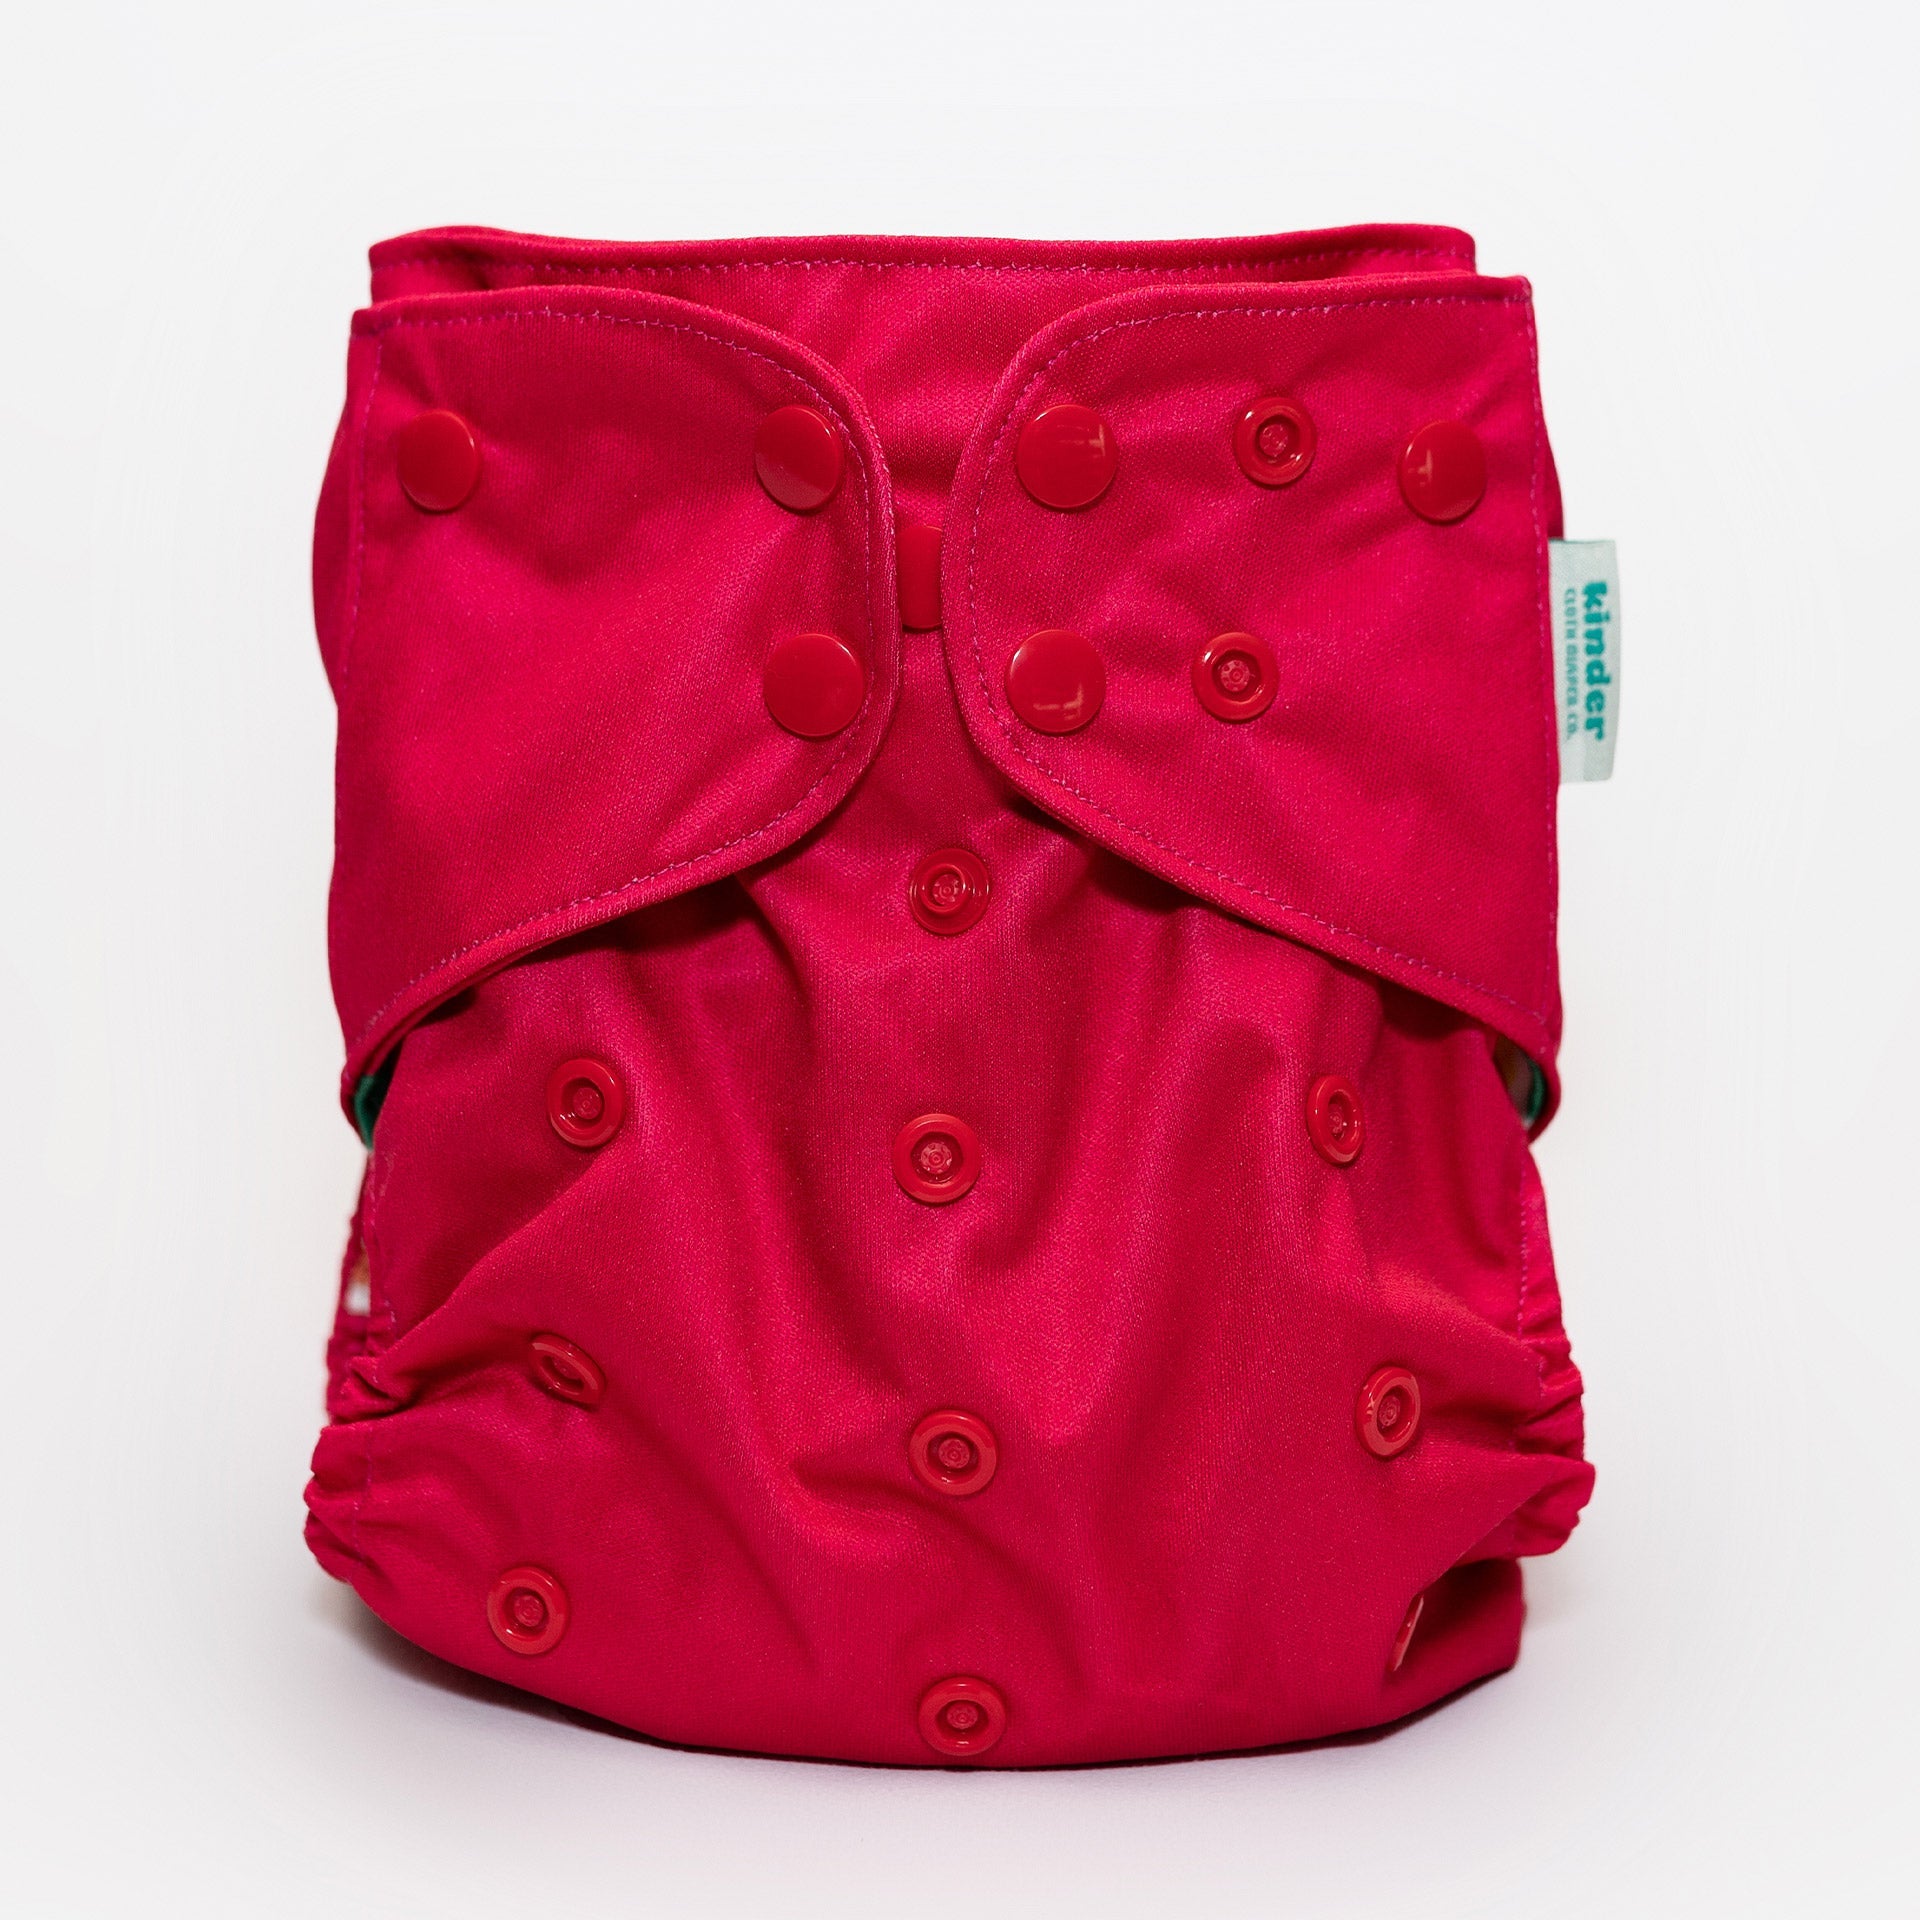 Last Chance Pocket Cloth Diaper with Athletic Wicking Jersey